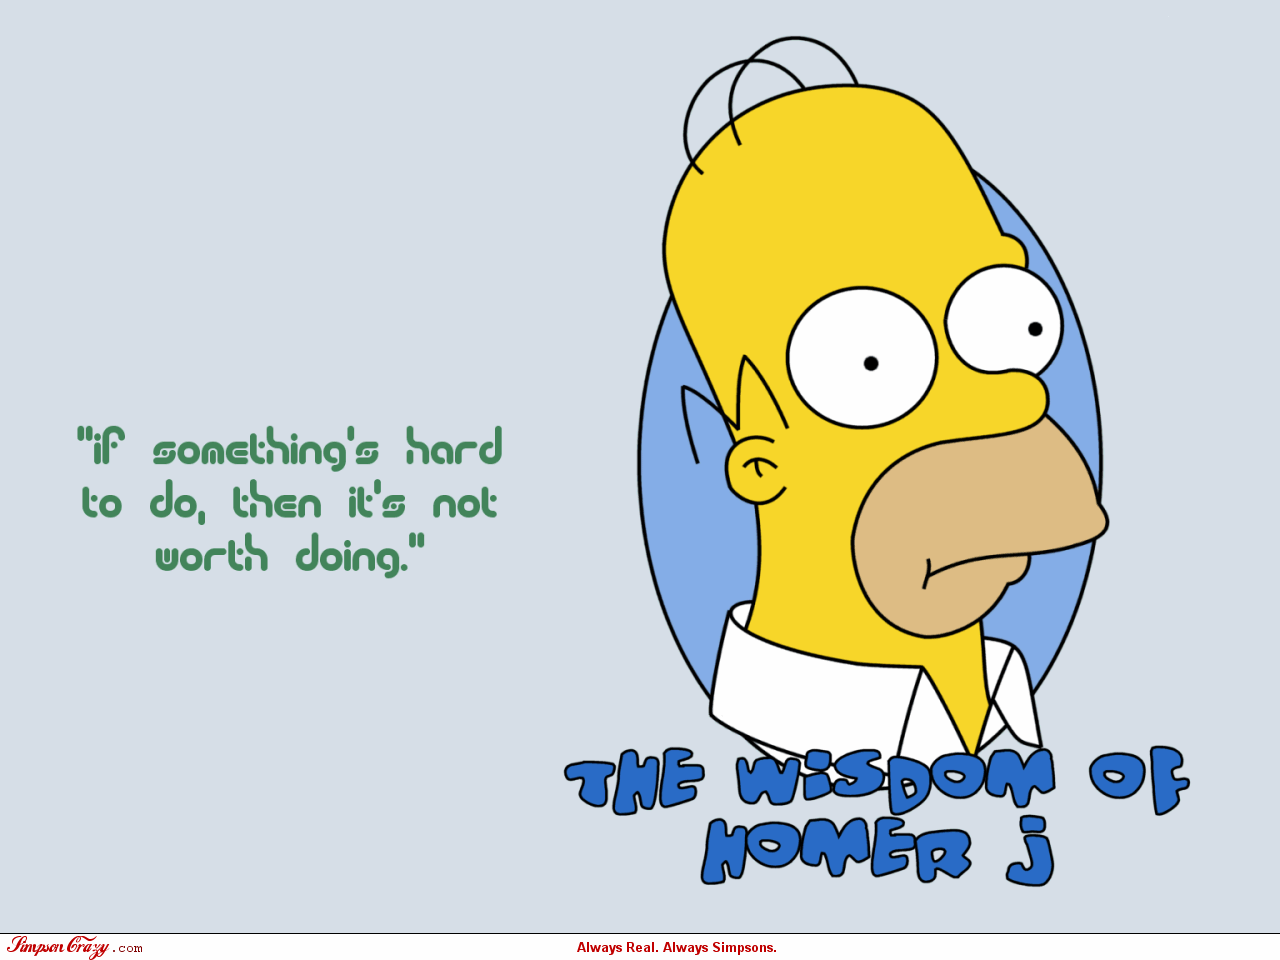 The Simpsons wallpaper